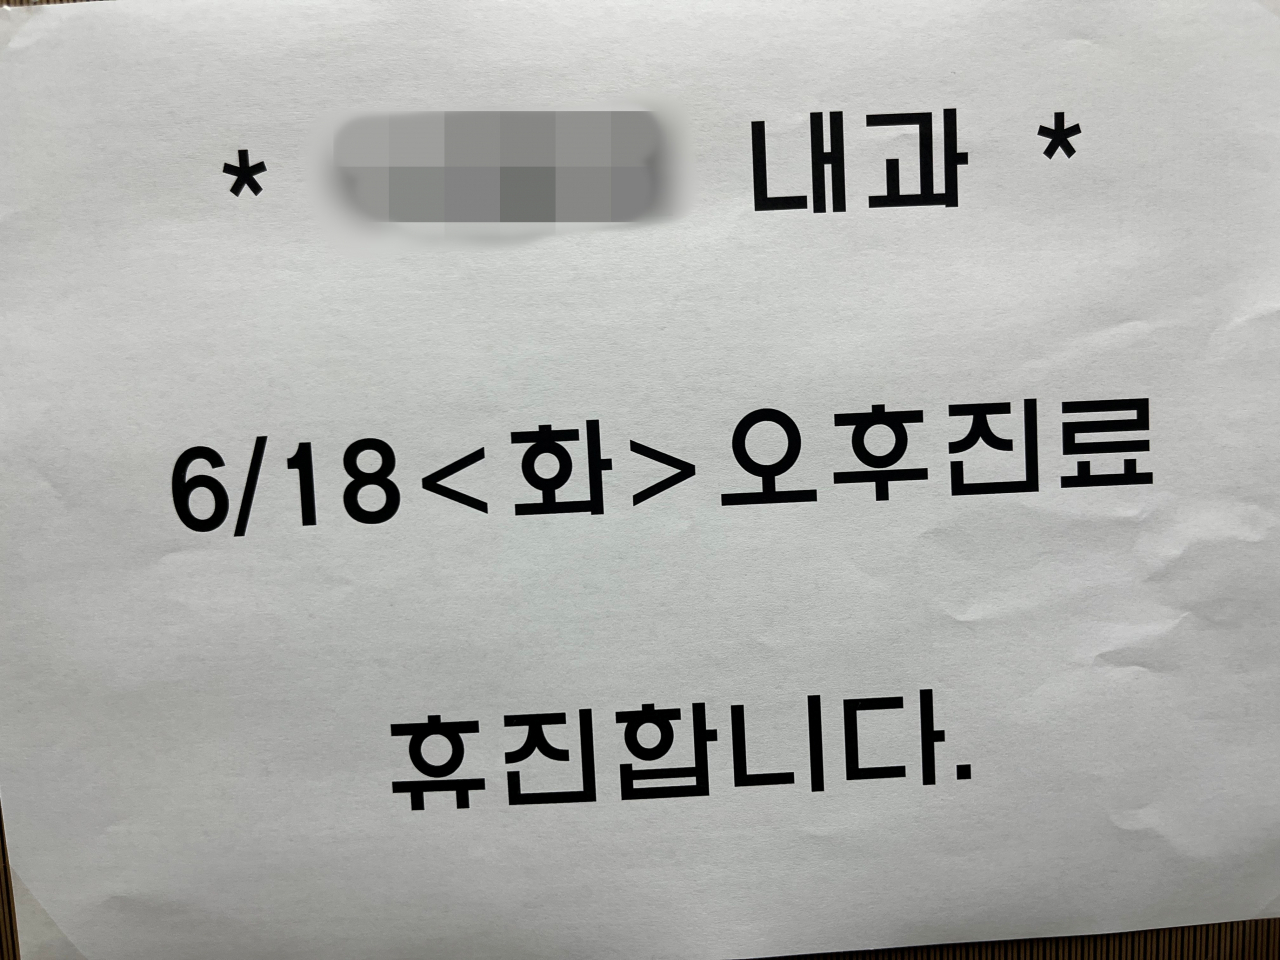 A notice at an internal medicine clinic in Nowon, Seoul, on Tuesday, says that the clinic will be closed for the afternoon of June 18. (Lee Jaeeun/The Korea Herald)